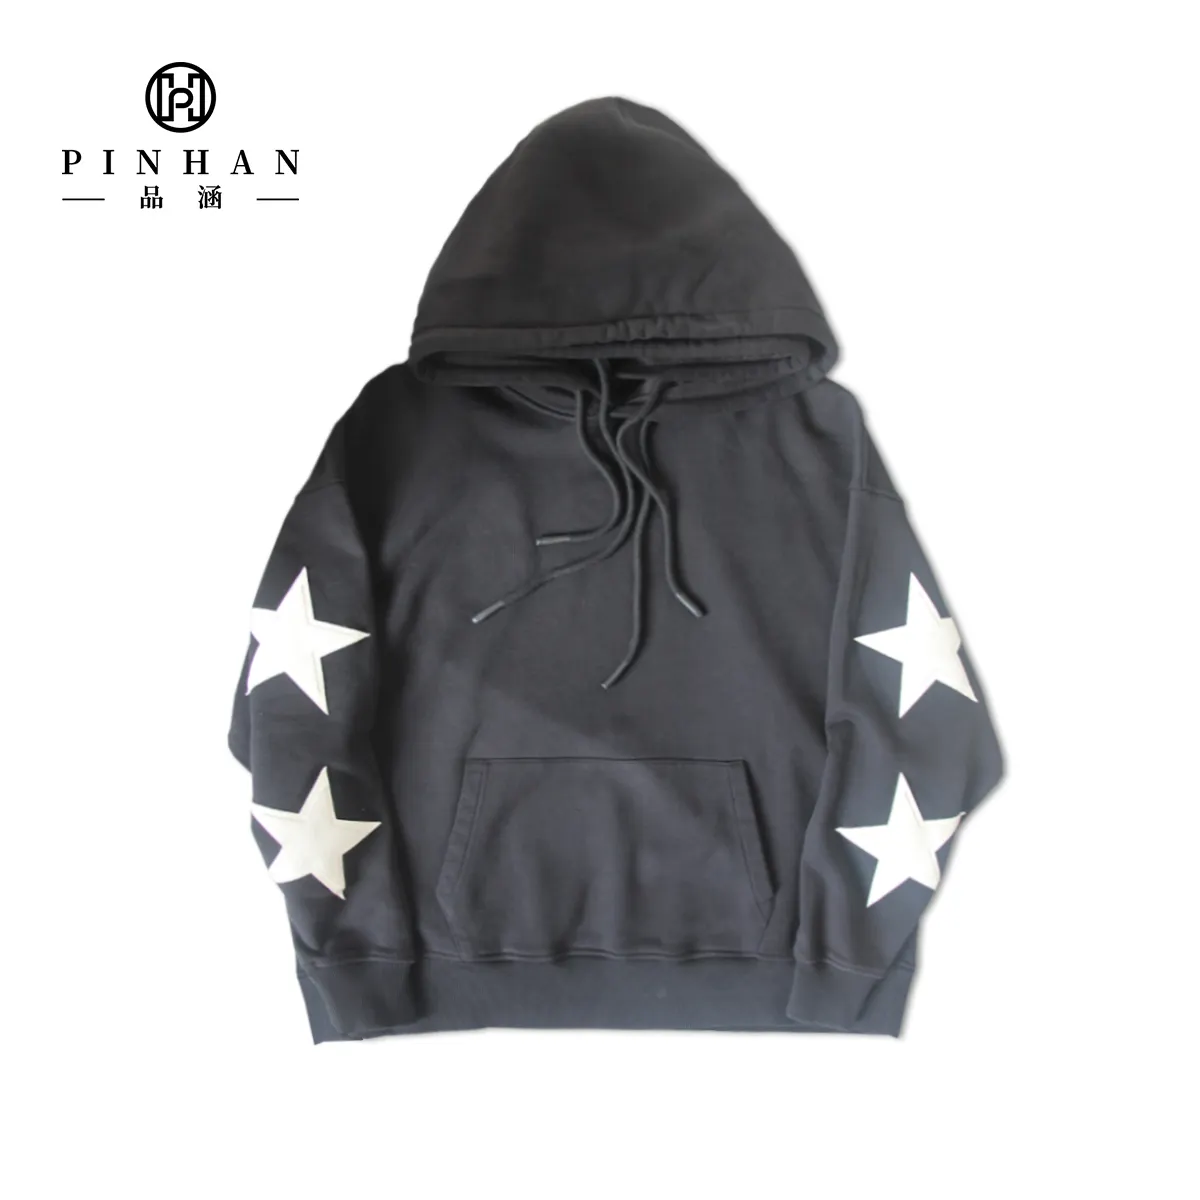 Double Hood Double Drawstring High Quantity Big Front Pocket Thread Cuff Wash Embroidery Men's Hoodies Sweatshirts